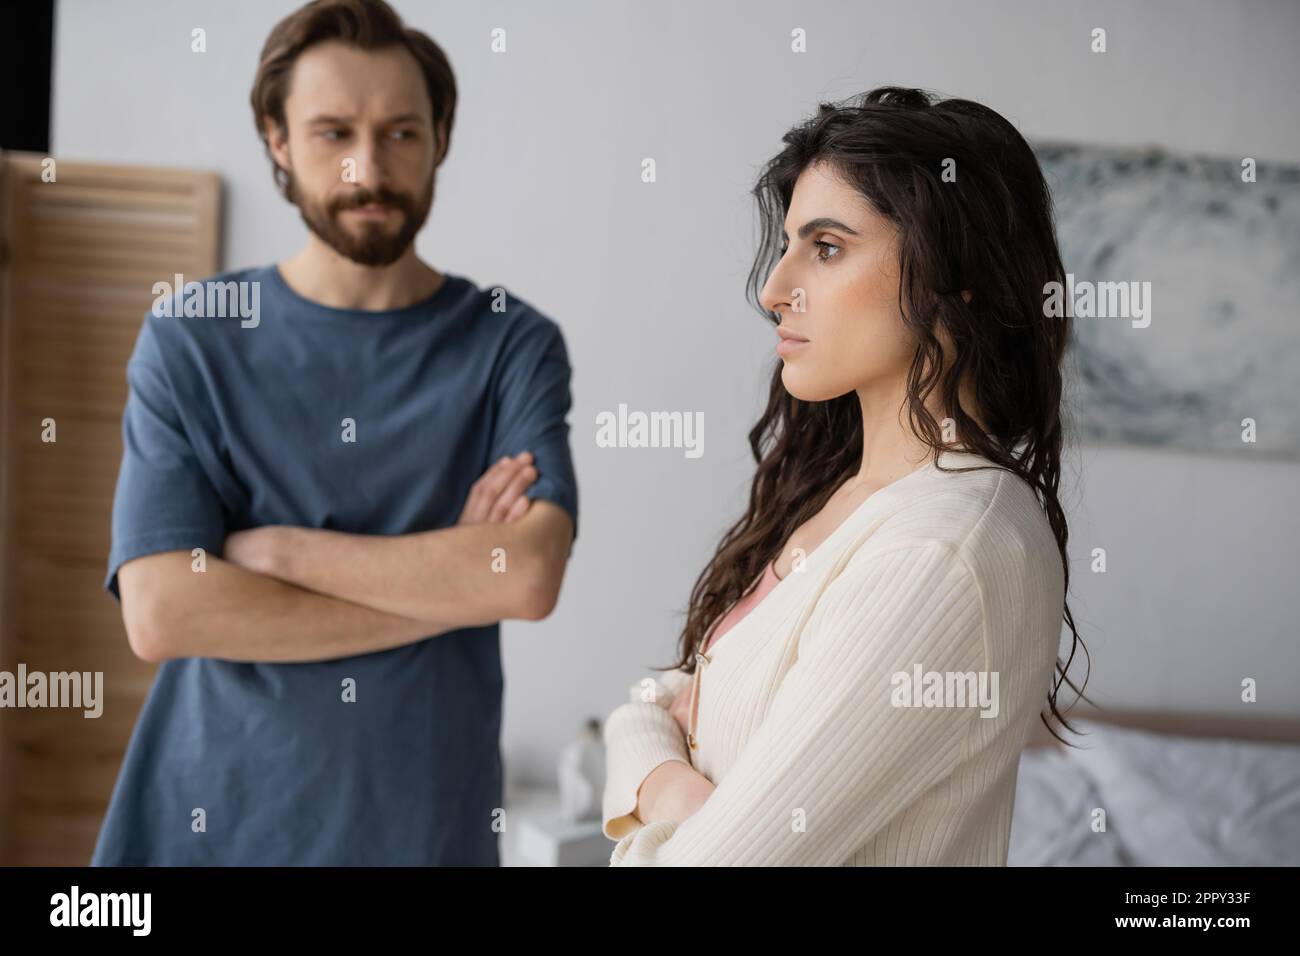 Offended brunette woman crossing arms near blurred boyfriend in bedroom,stock image Stock Photo